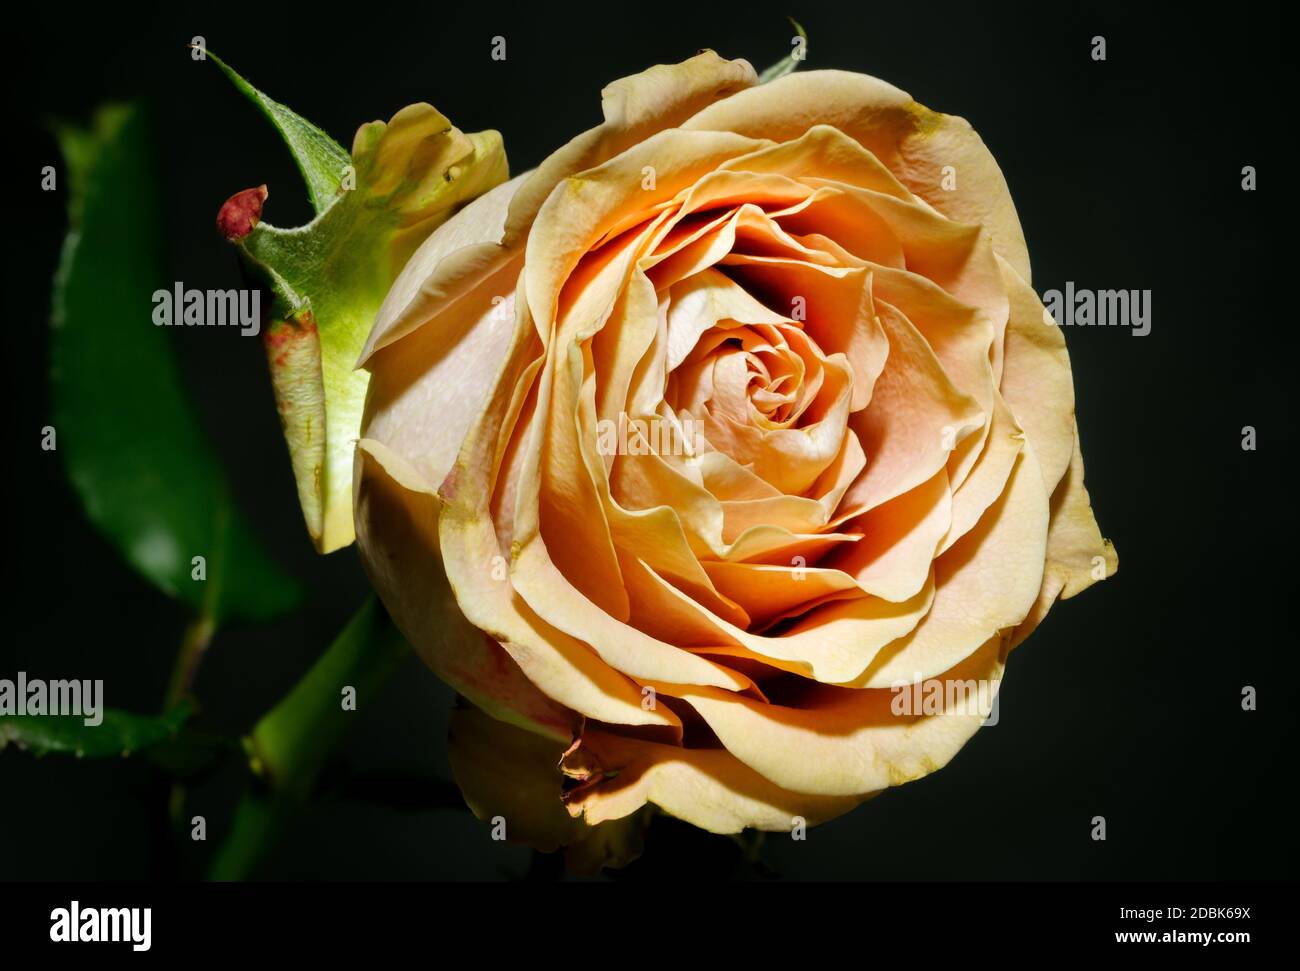 Colourful rose, on a dark background. Photographed from a close distance, in full bloom. Stock Photo